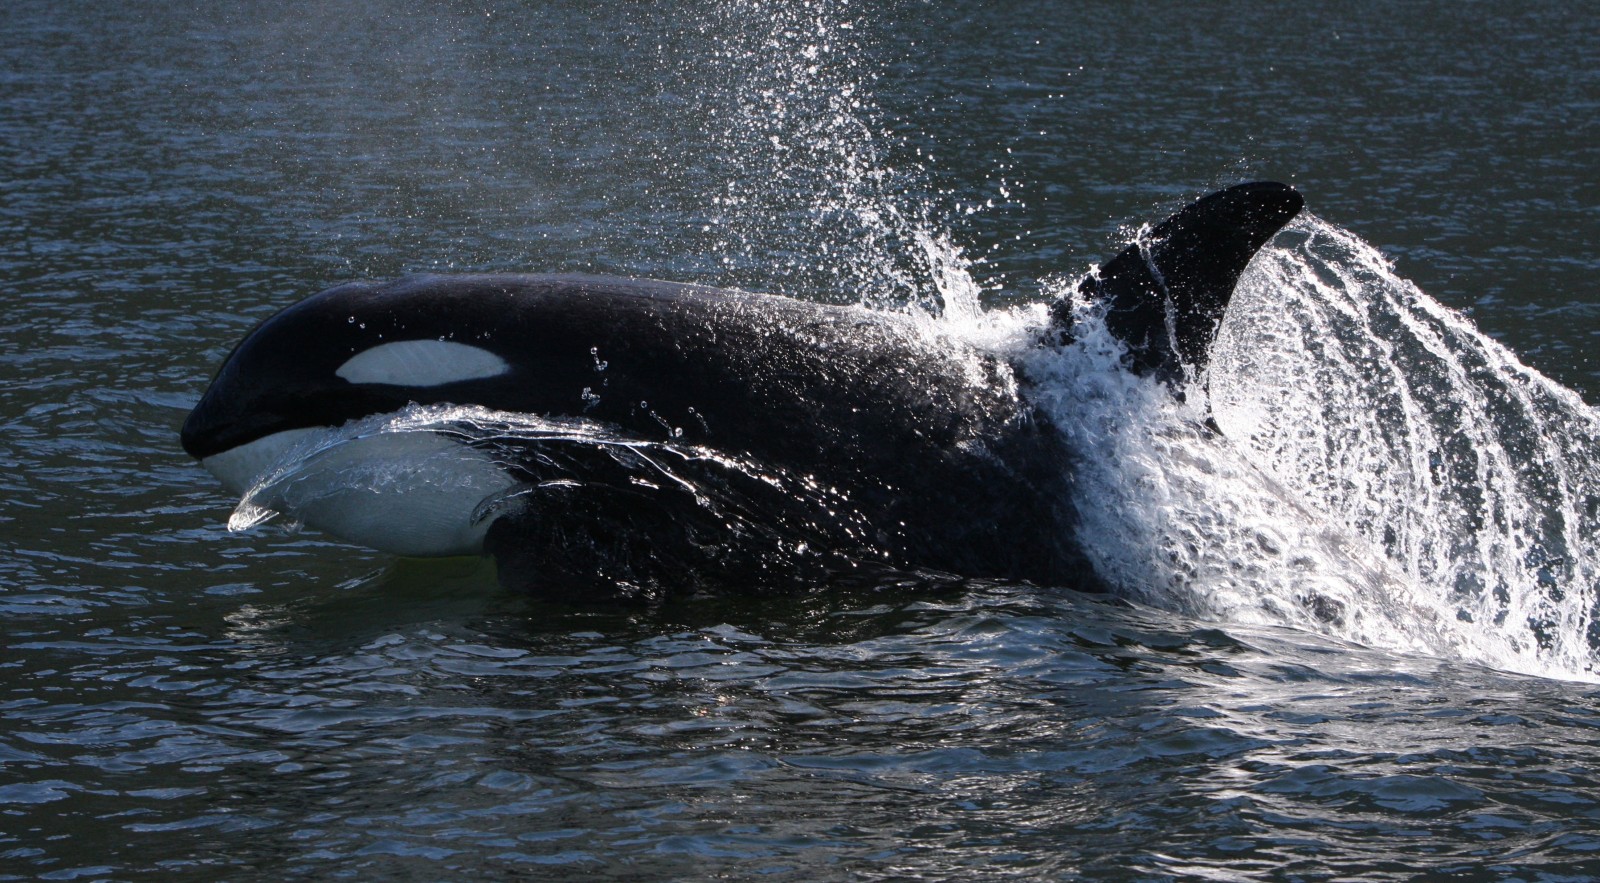 A photo of an orca whale leaping out of the sea with a splash!